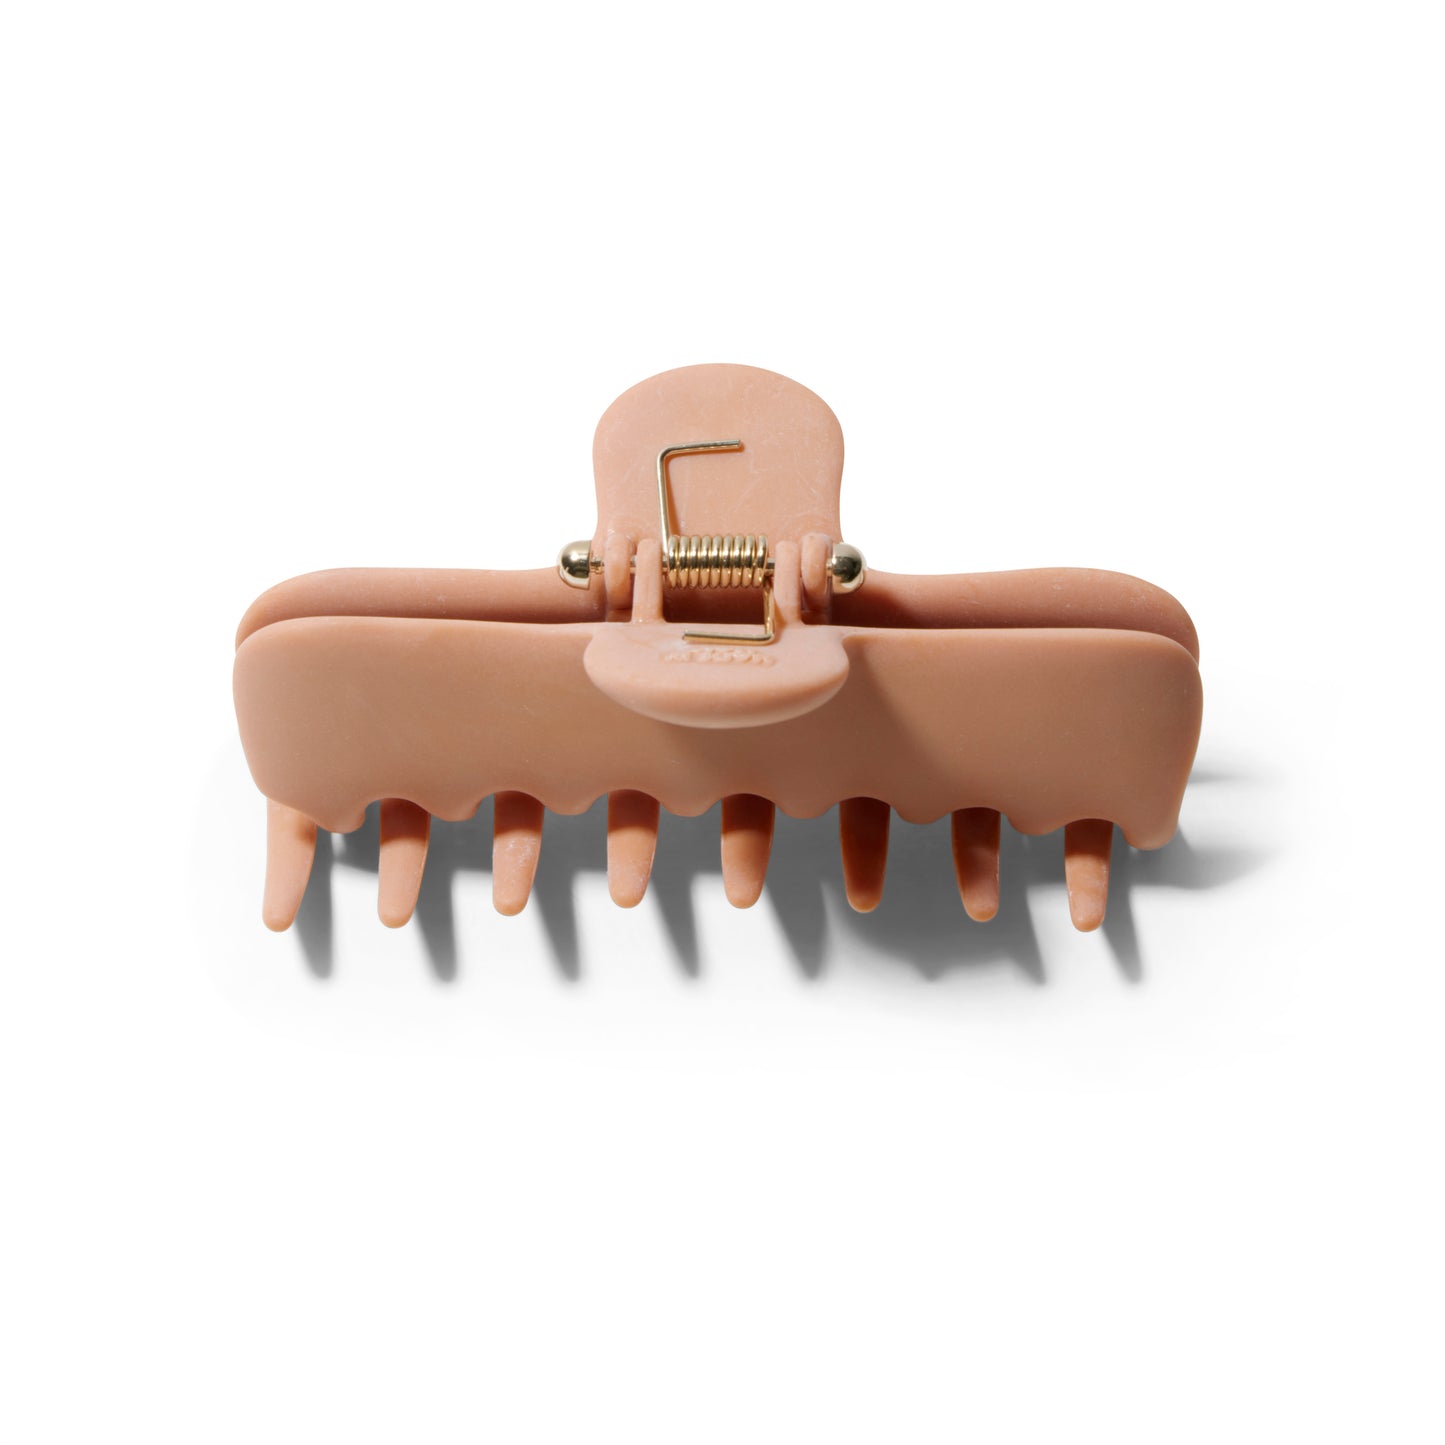 Top view of the Undo 4 inch matte terracotta colored claw clip showing the elegant gold spring.